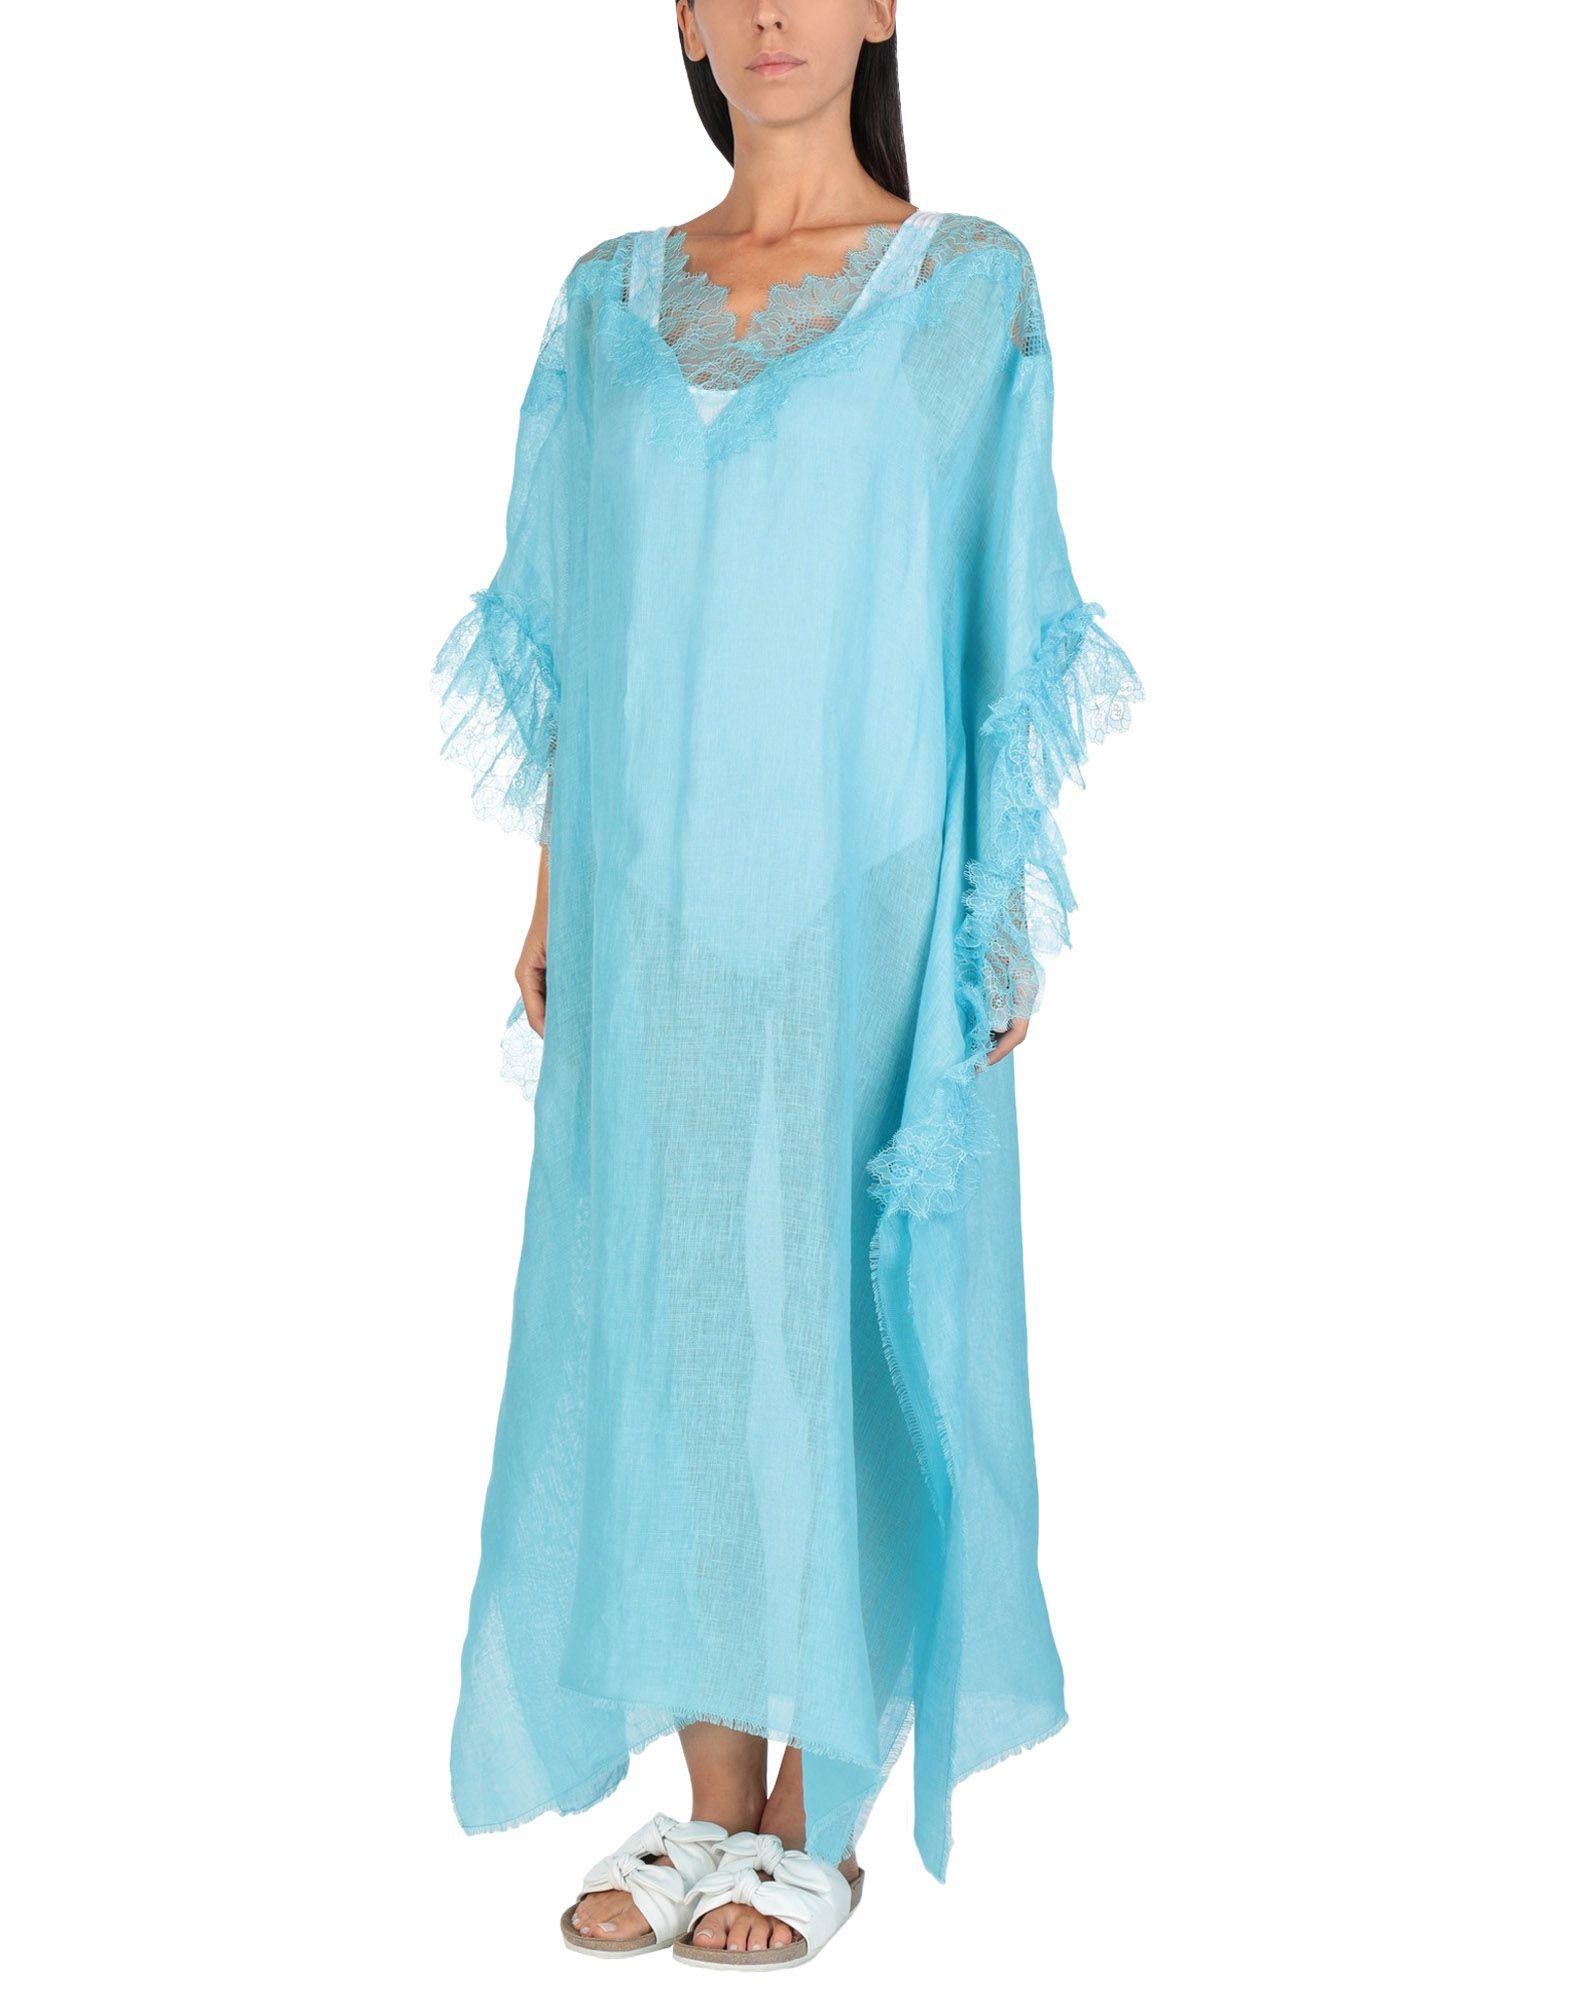 Ermanno Scervino Lace Cover-up in Sky Blue (Blue) - Lyst